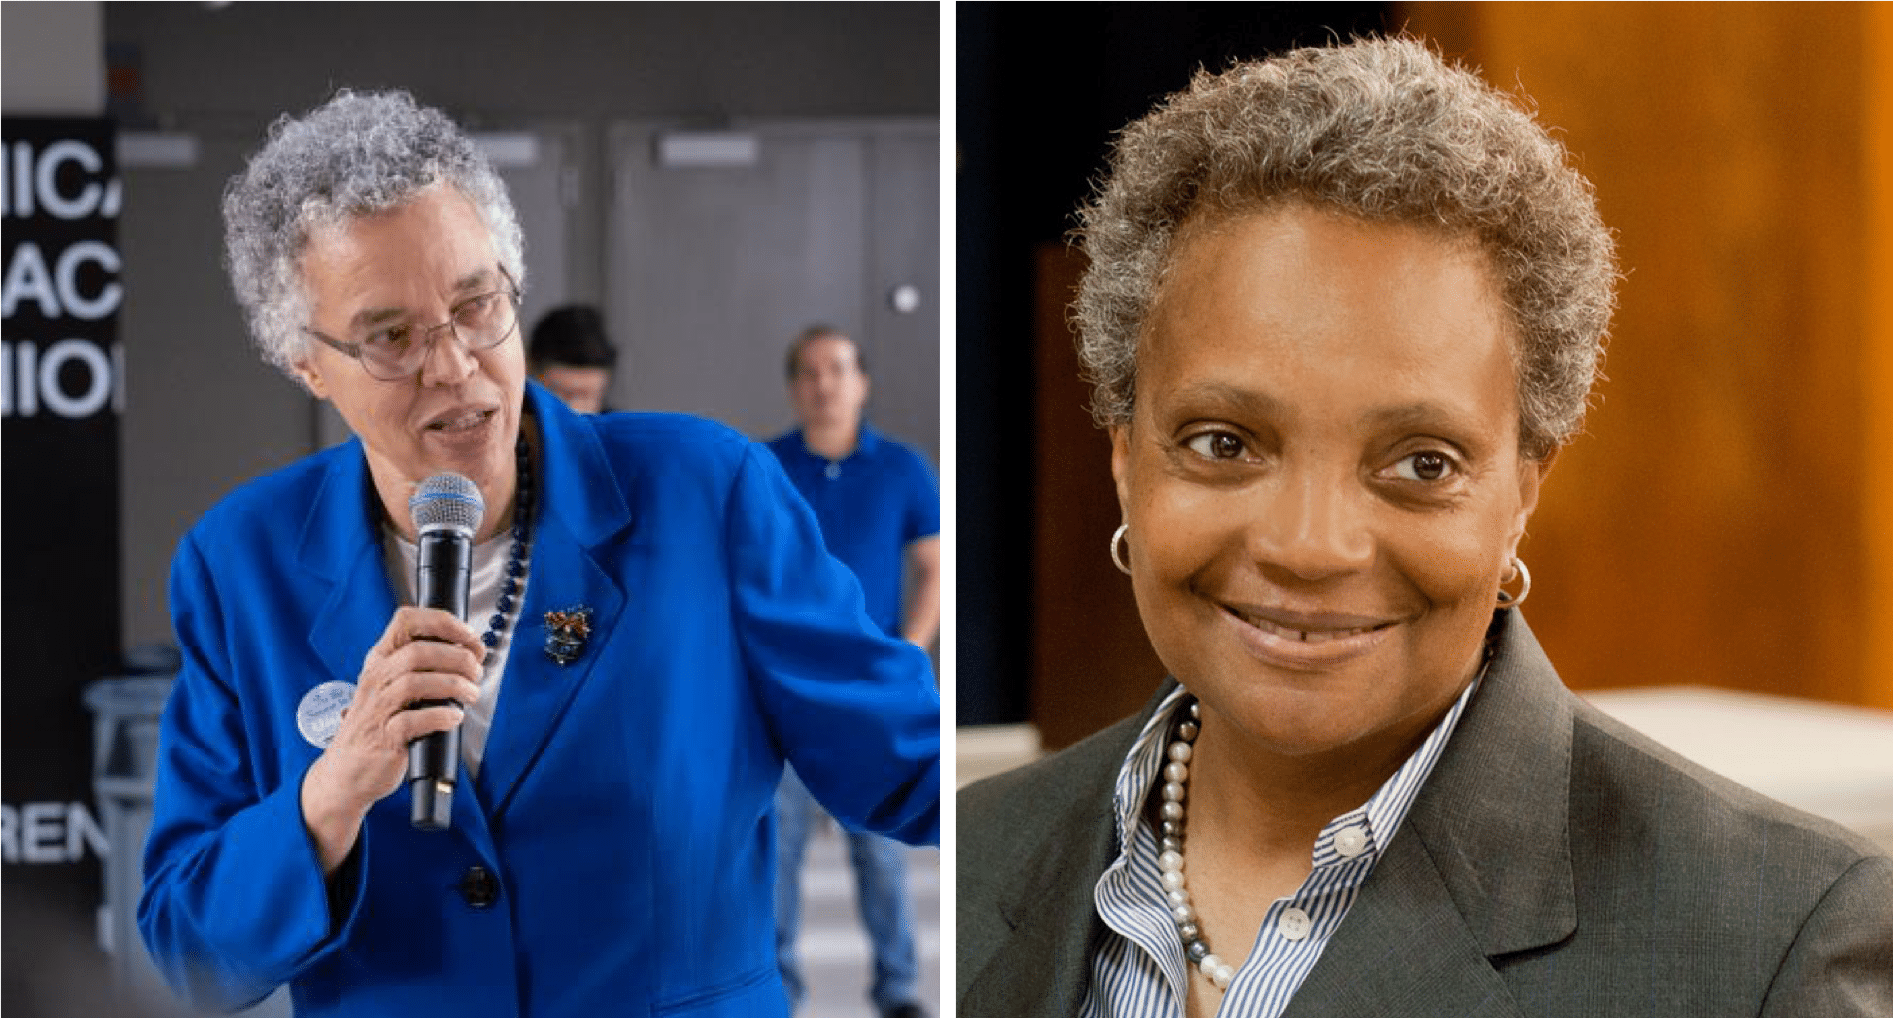 Votes Are In: The Next Mayor Of Chicago Will Be A Black Woman